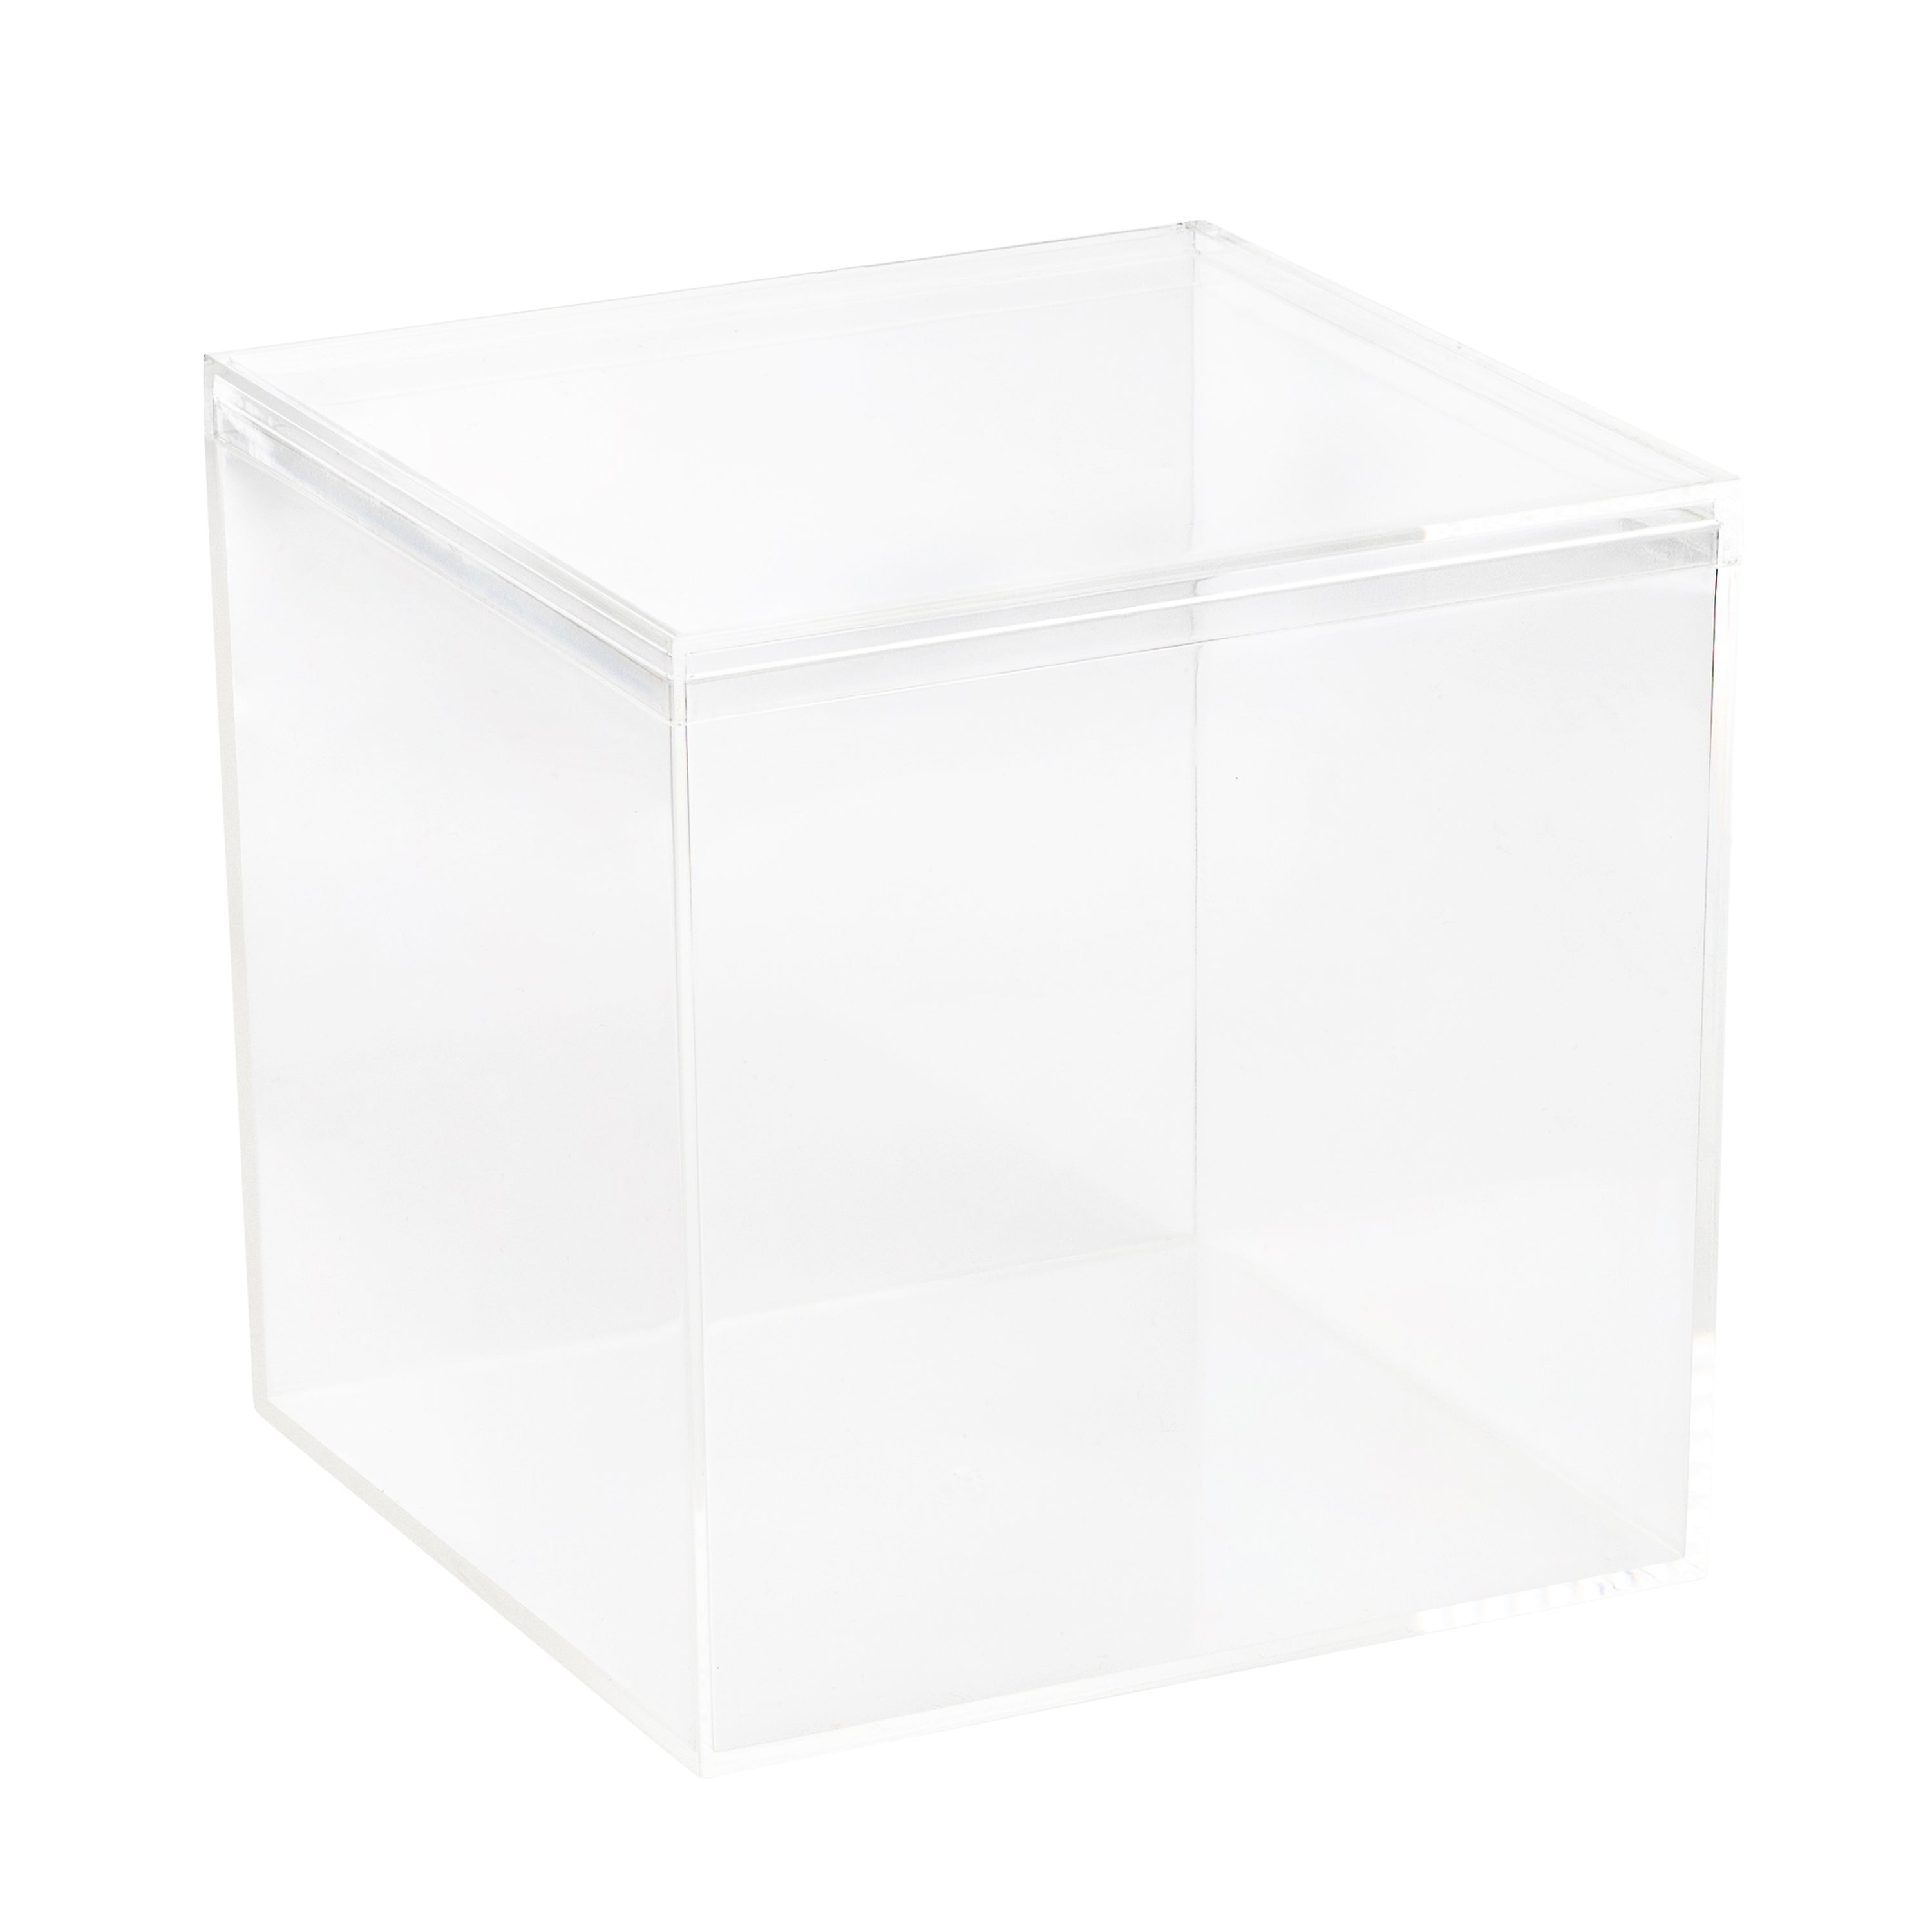 Clear Acrylic Boxes with Lid 5.875x5.875x5.875 Inches Pack of 1 Box, Gift Box and Treat Box. Lucite Cube Display Boxes with Lid